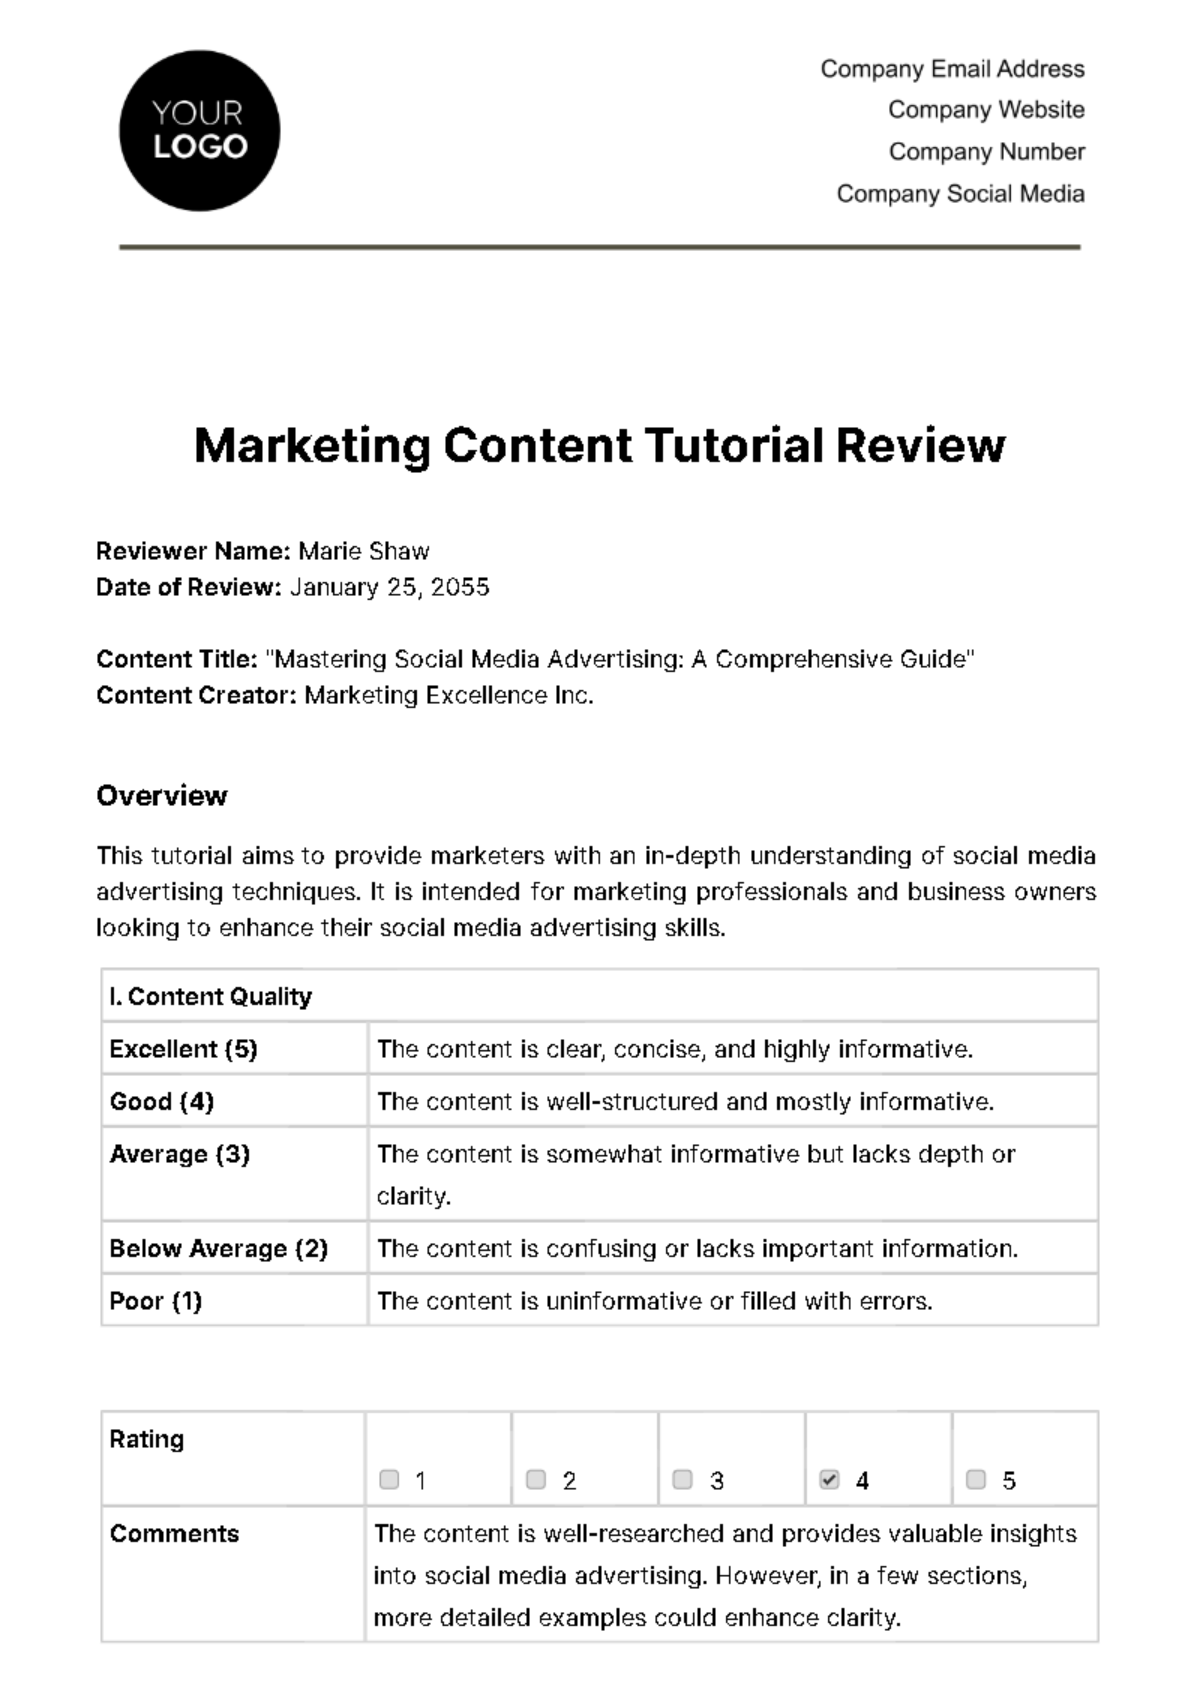 Free Marketing Content Tutorial Review Template